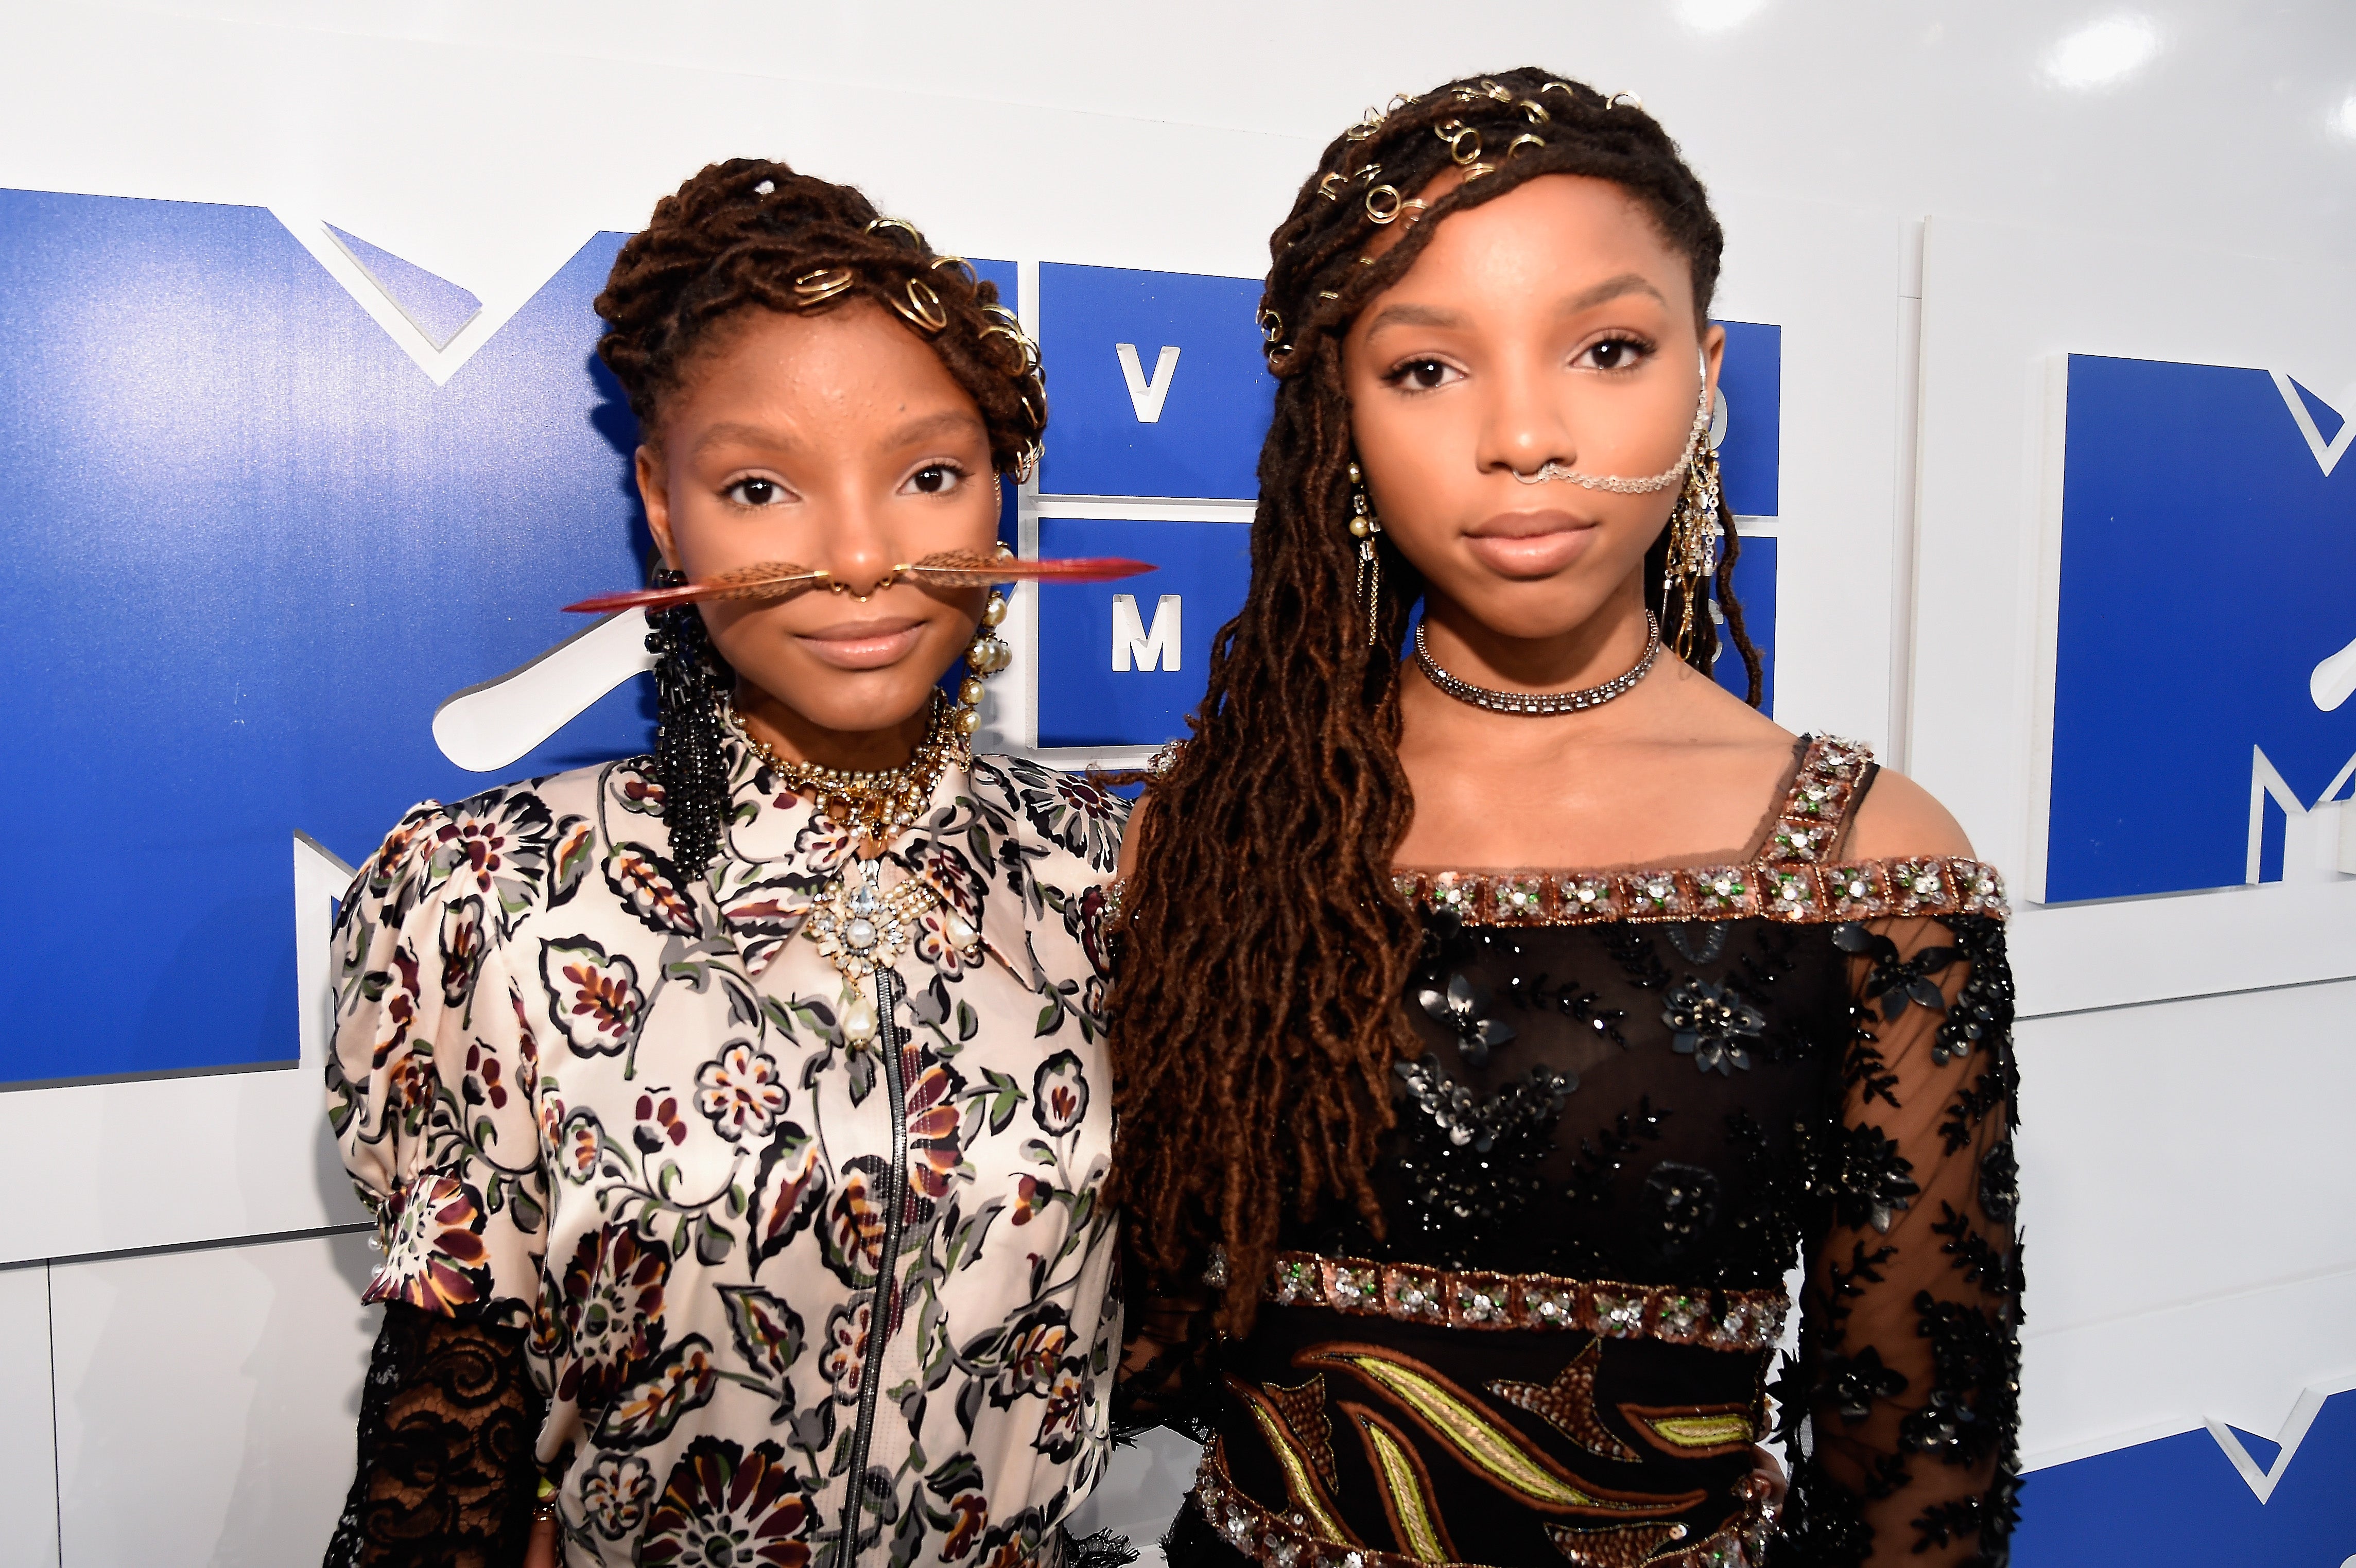 You Have To See Chloe & Halle's Face Jewelry At The 2016 VMAs
